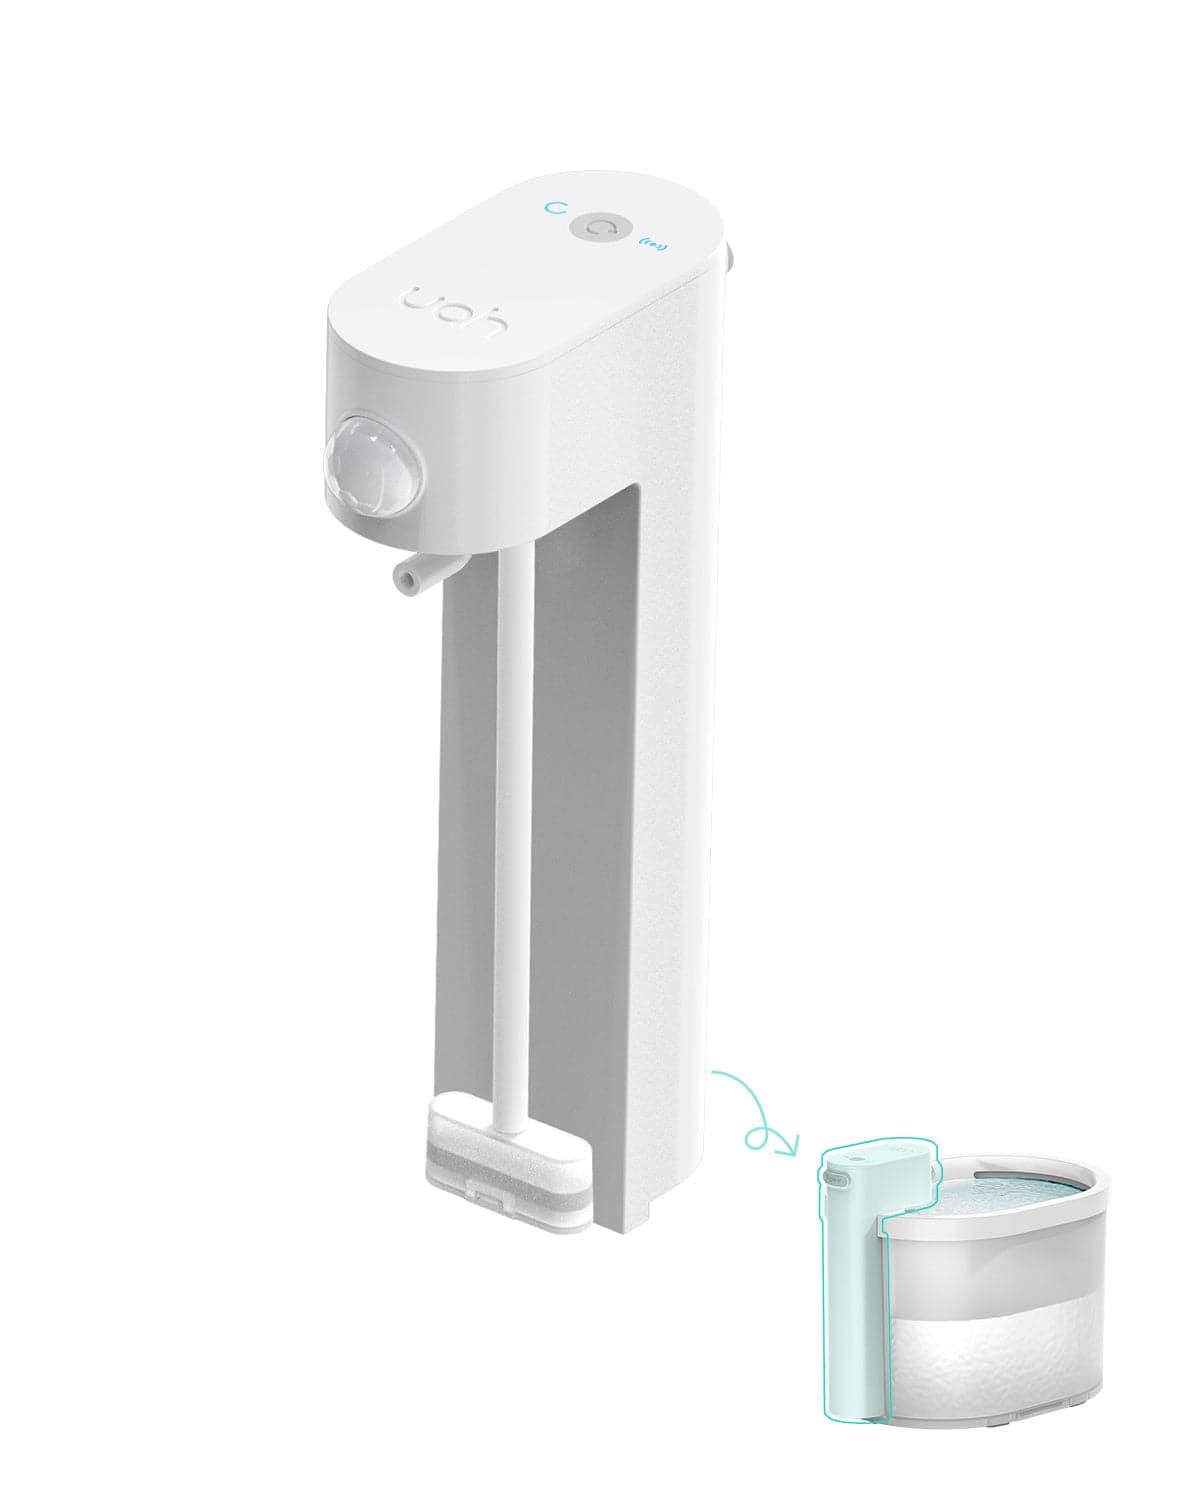 the isolated pump of the uahpet wireless cat water dispenser